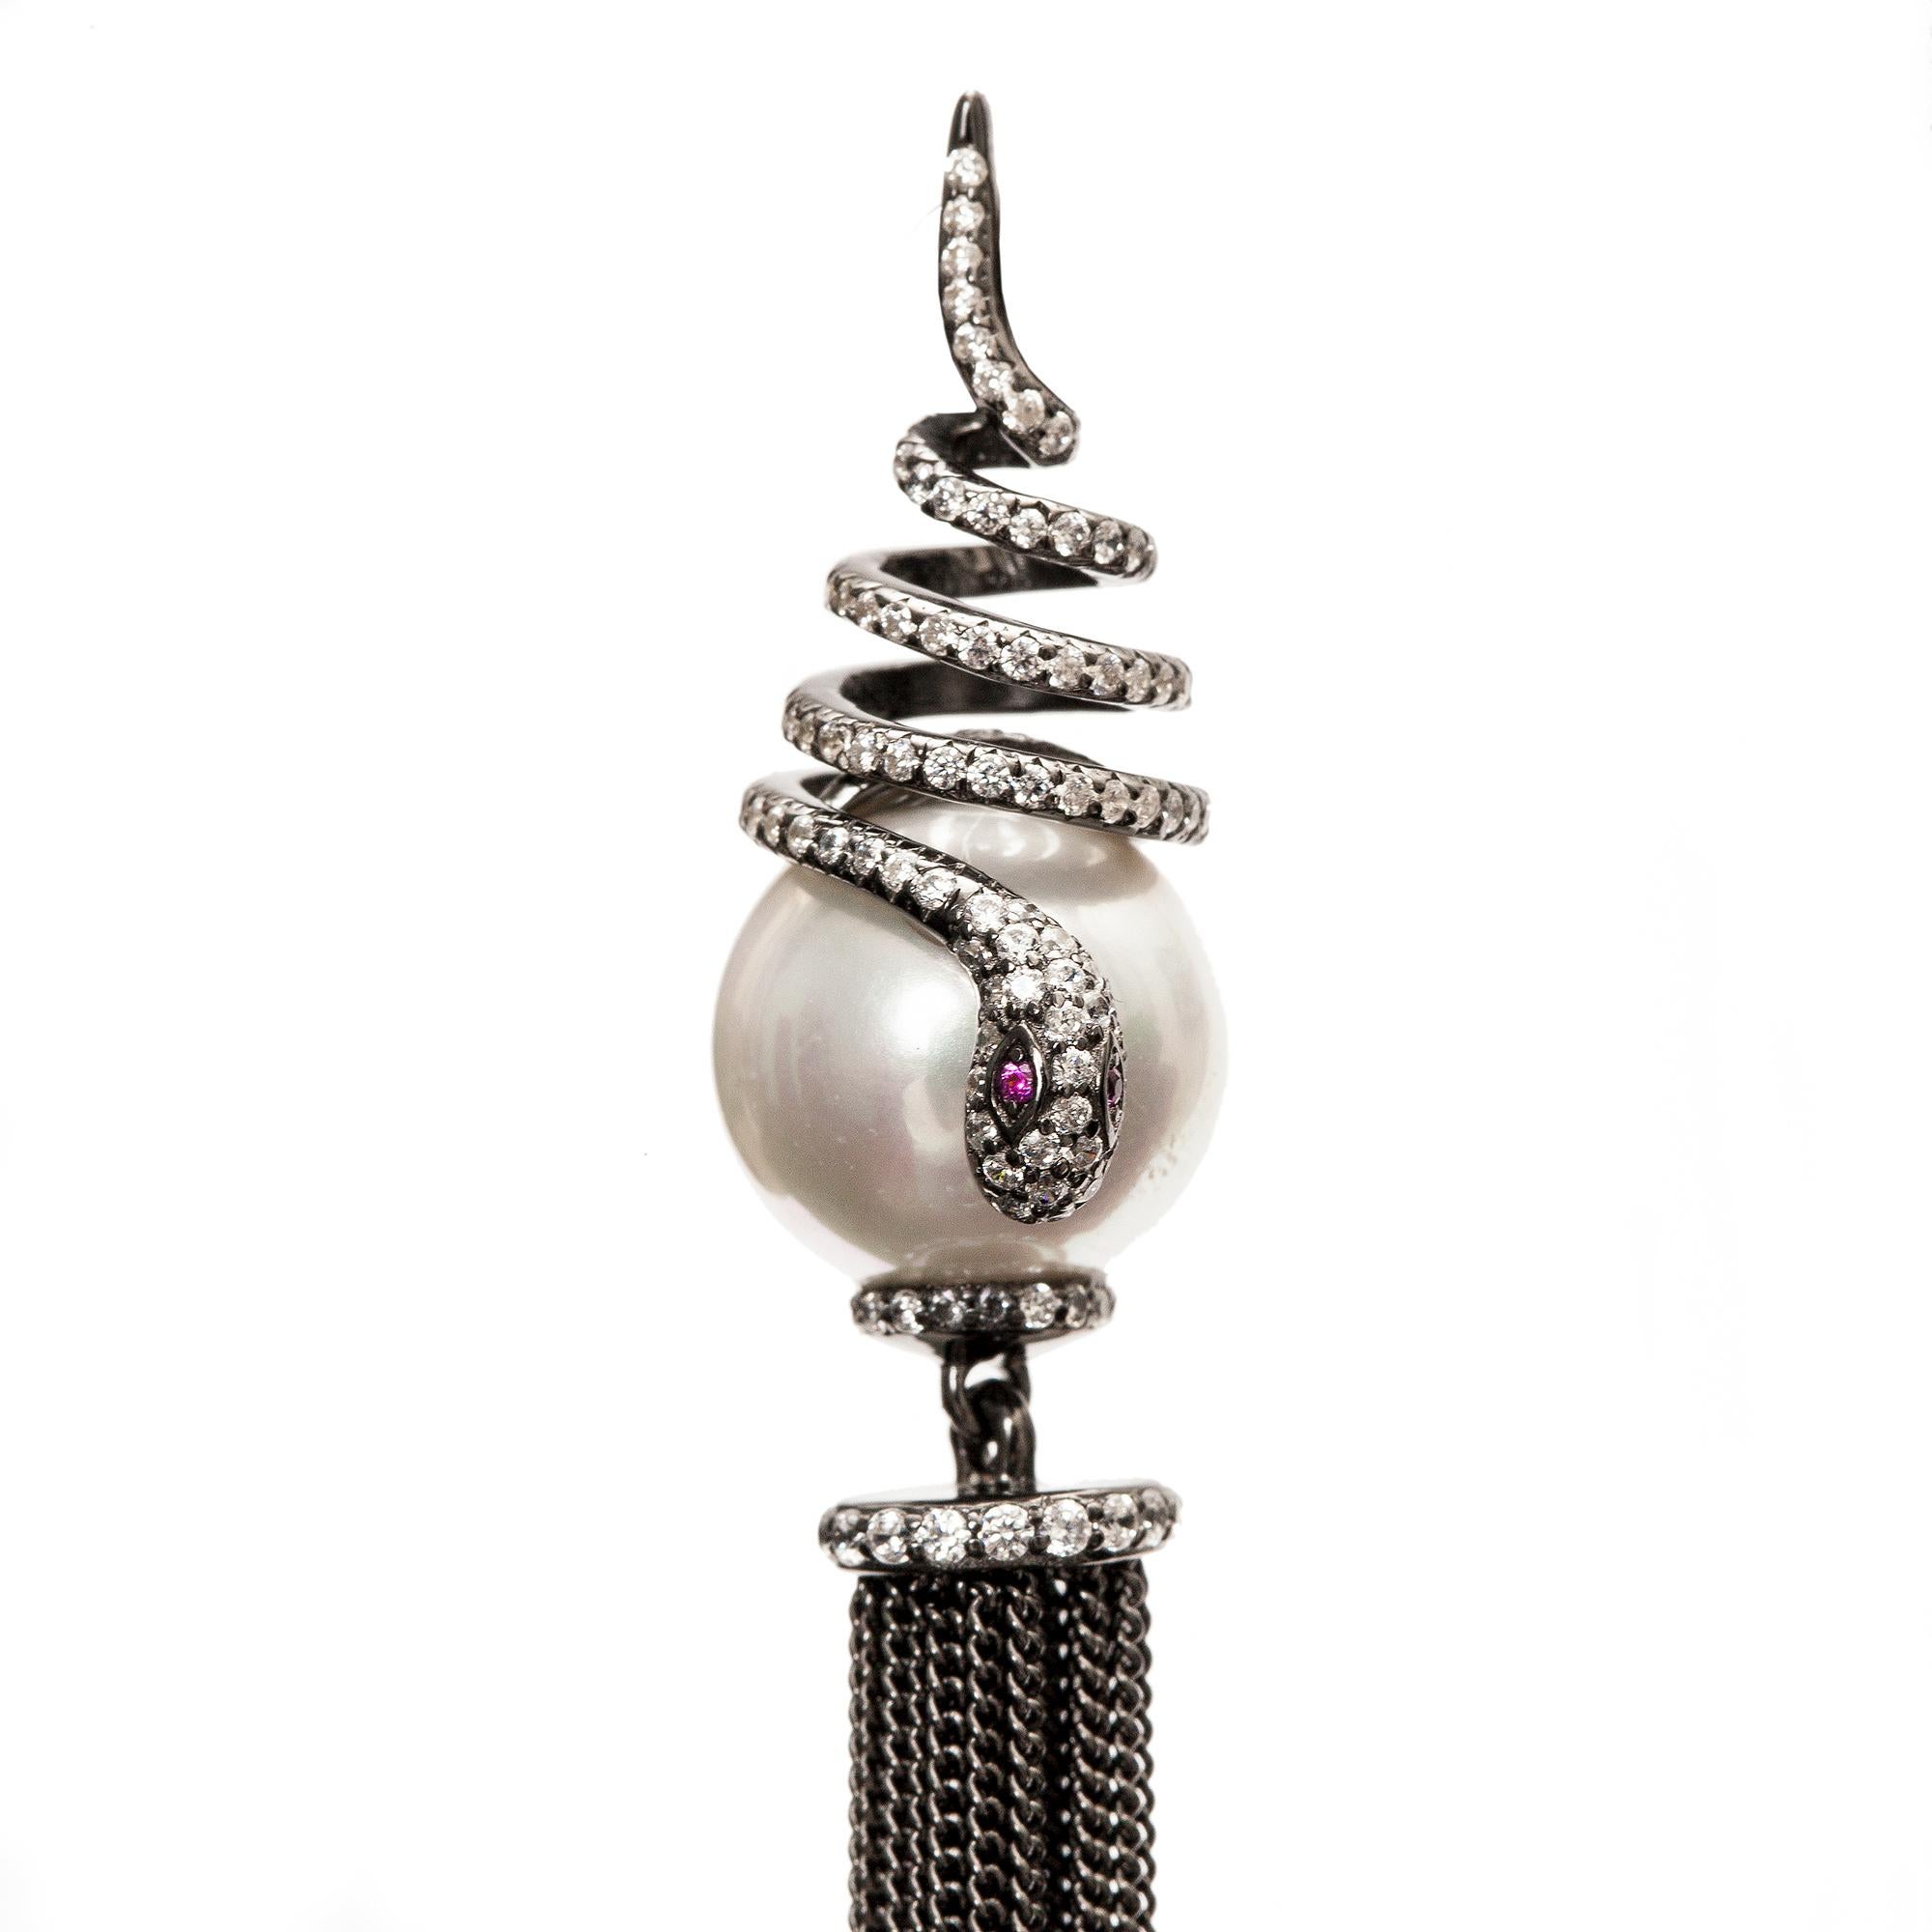 Sahara earrings are part of AMMANII's Princess Collection. It embodies the femininity and allure of a woman- The Princess. Hand crafted from sterling silver with black rhodium plating, fresh water pearls and hand set zircon.  